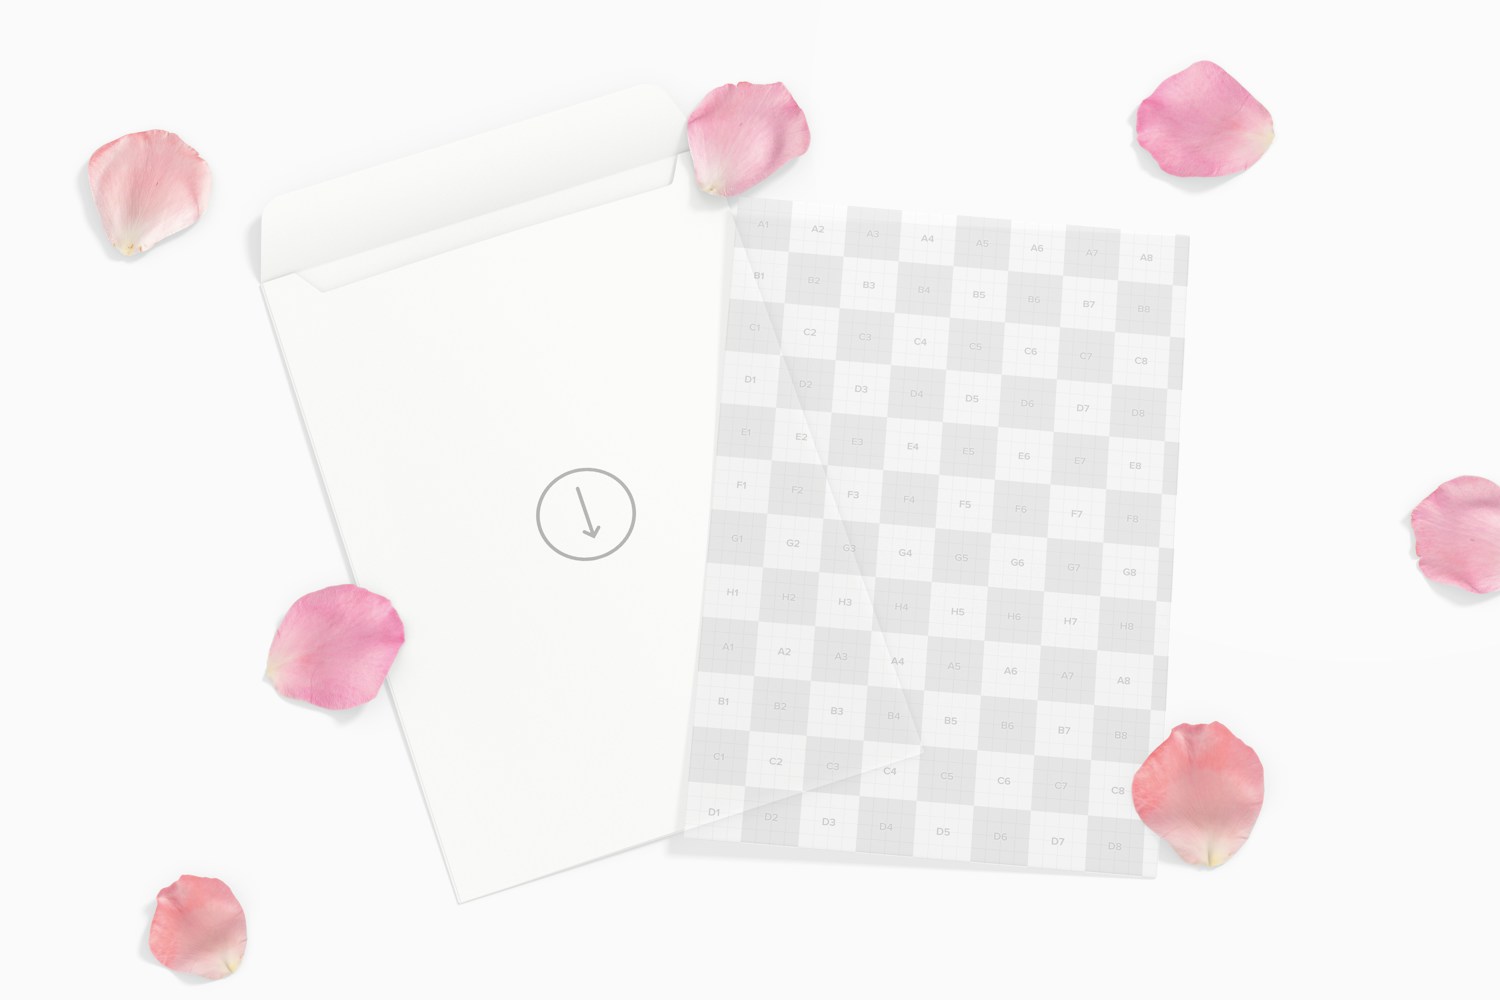 Frosted Acrylic Invitation Card with Envelope Mockup